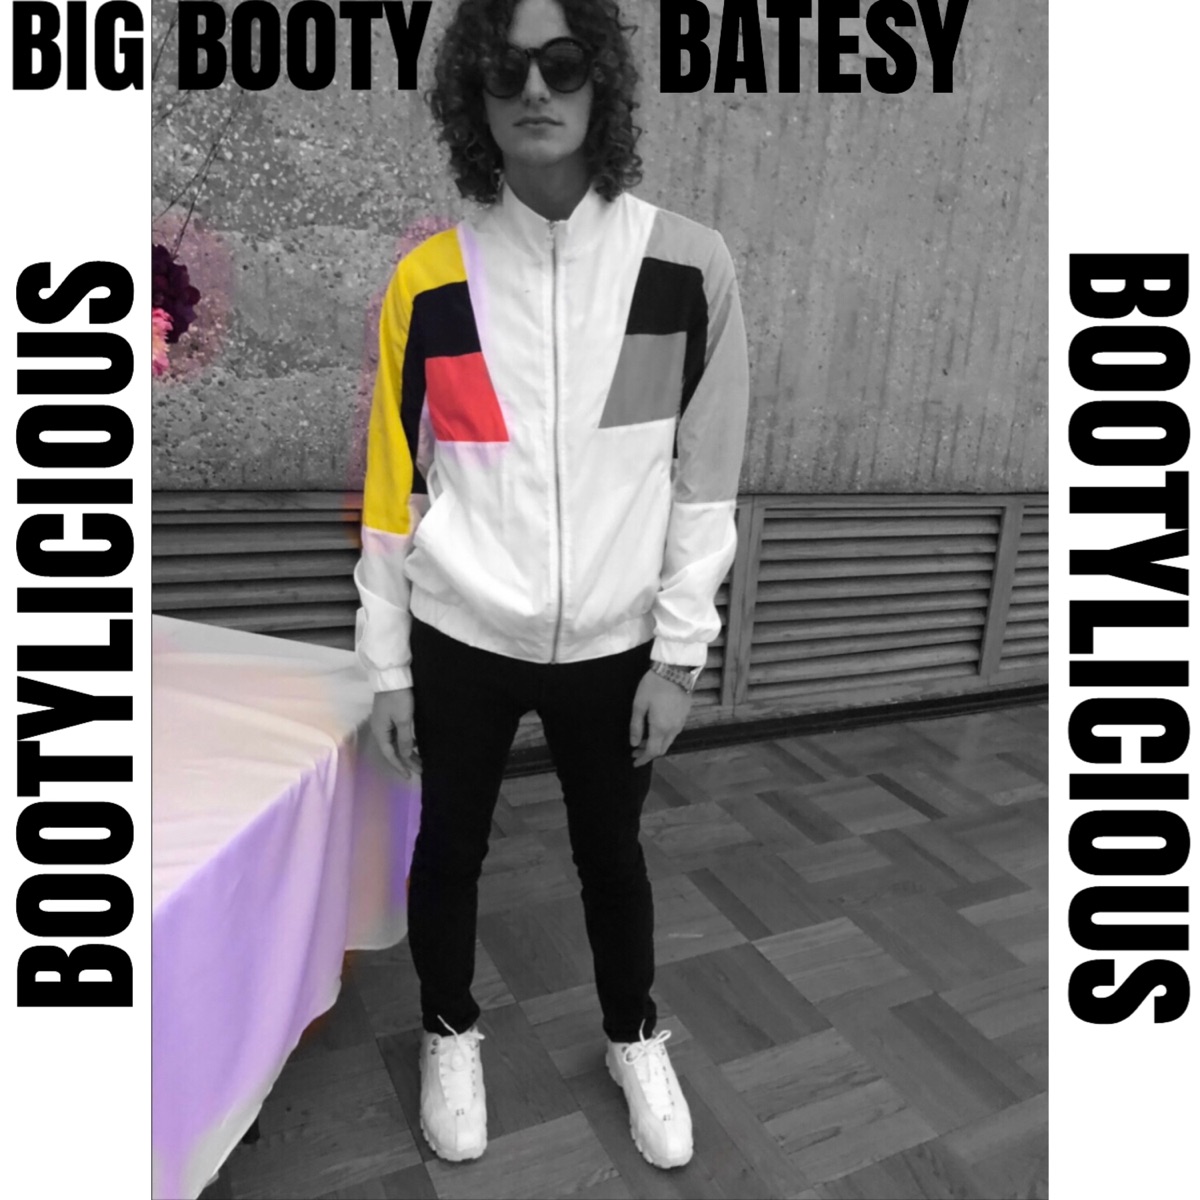 ahmed wagieh recommends Big Booty Licious